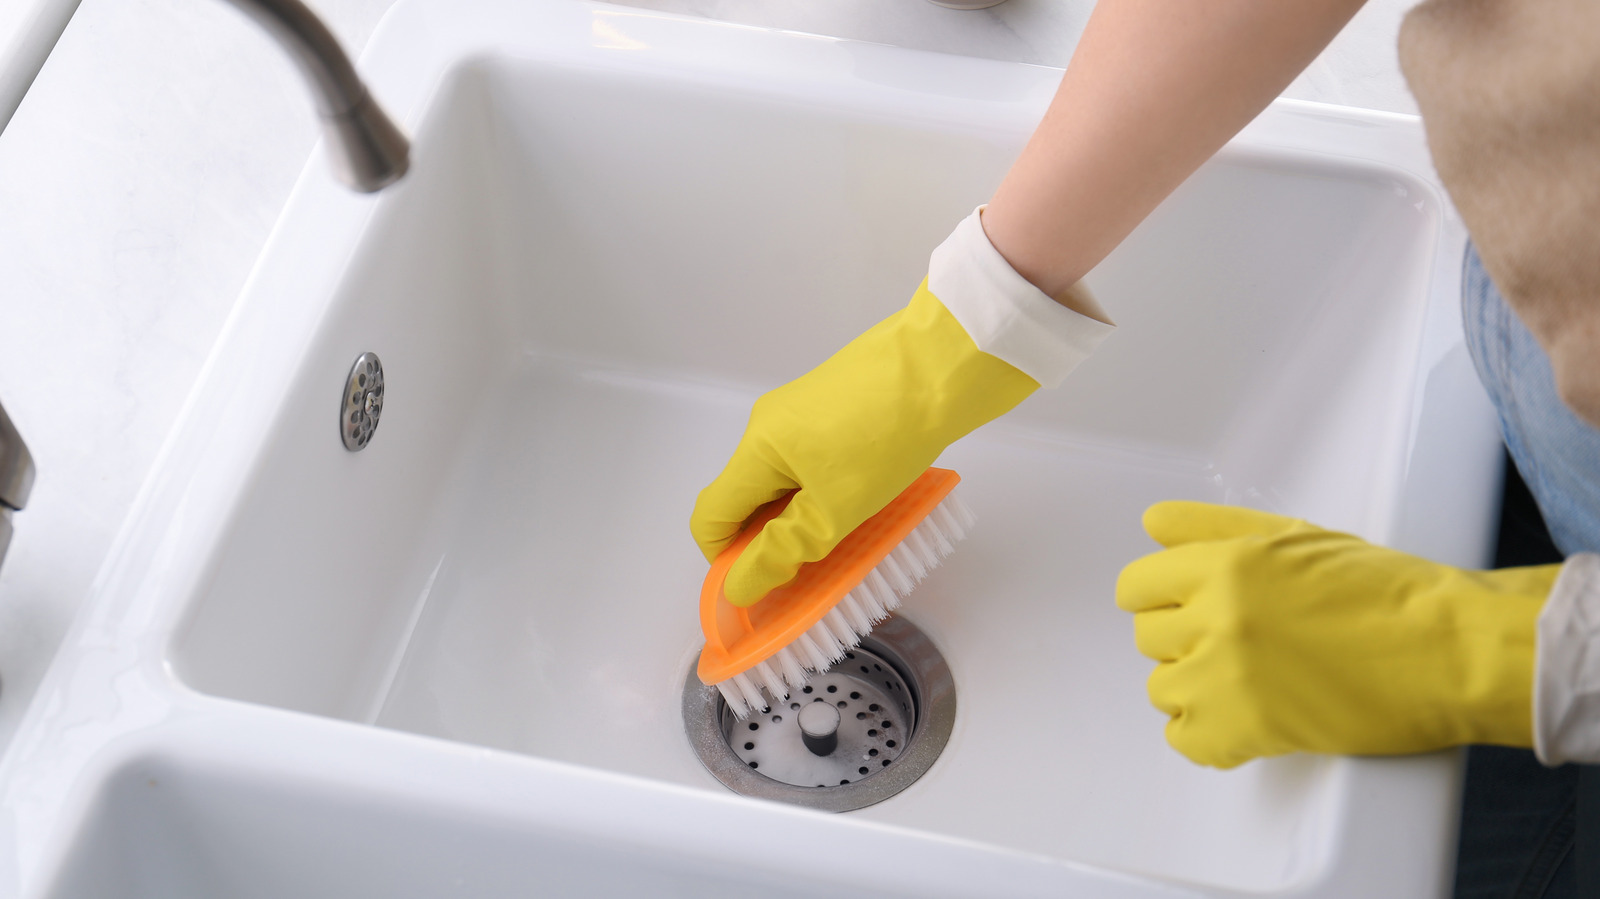 This Genius Cleaning Tool Catches Hair in the Shower - How to Prevent  Clogged Drains